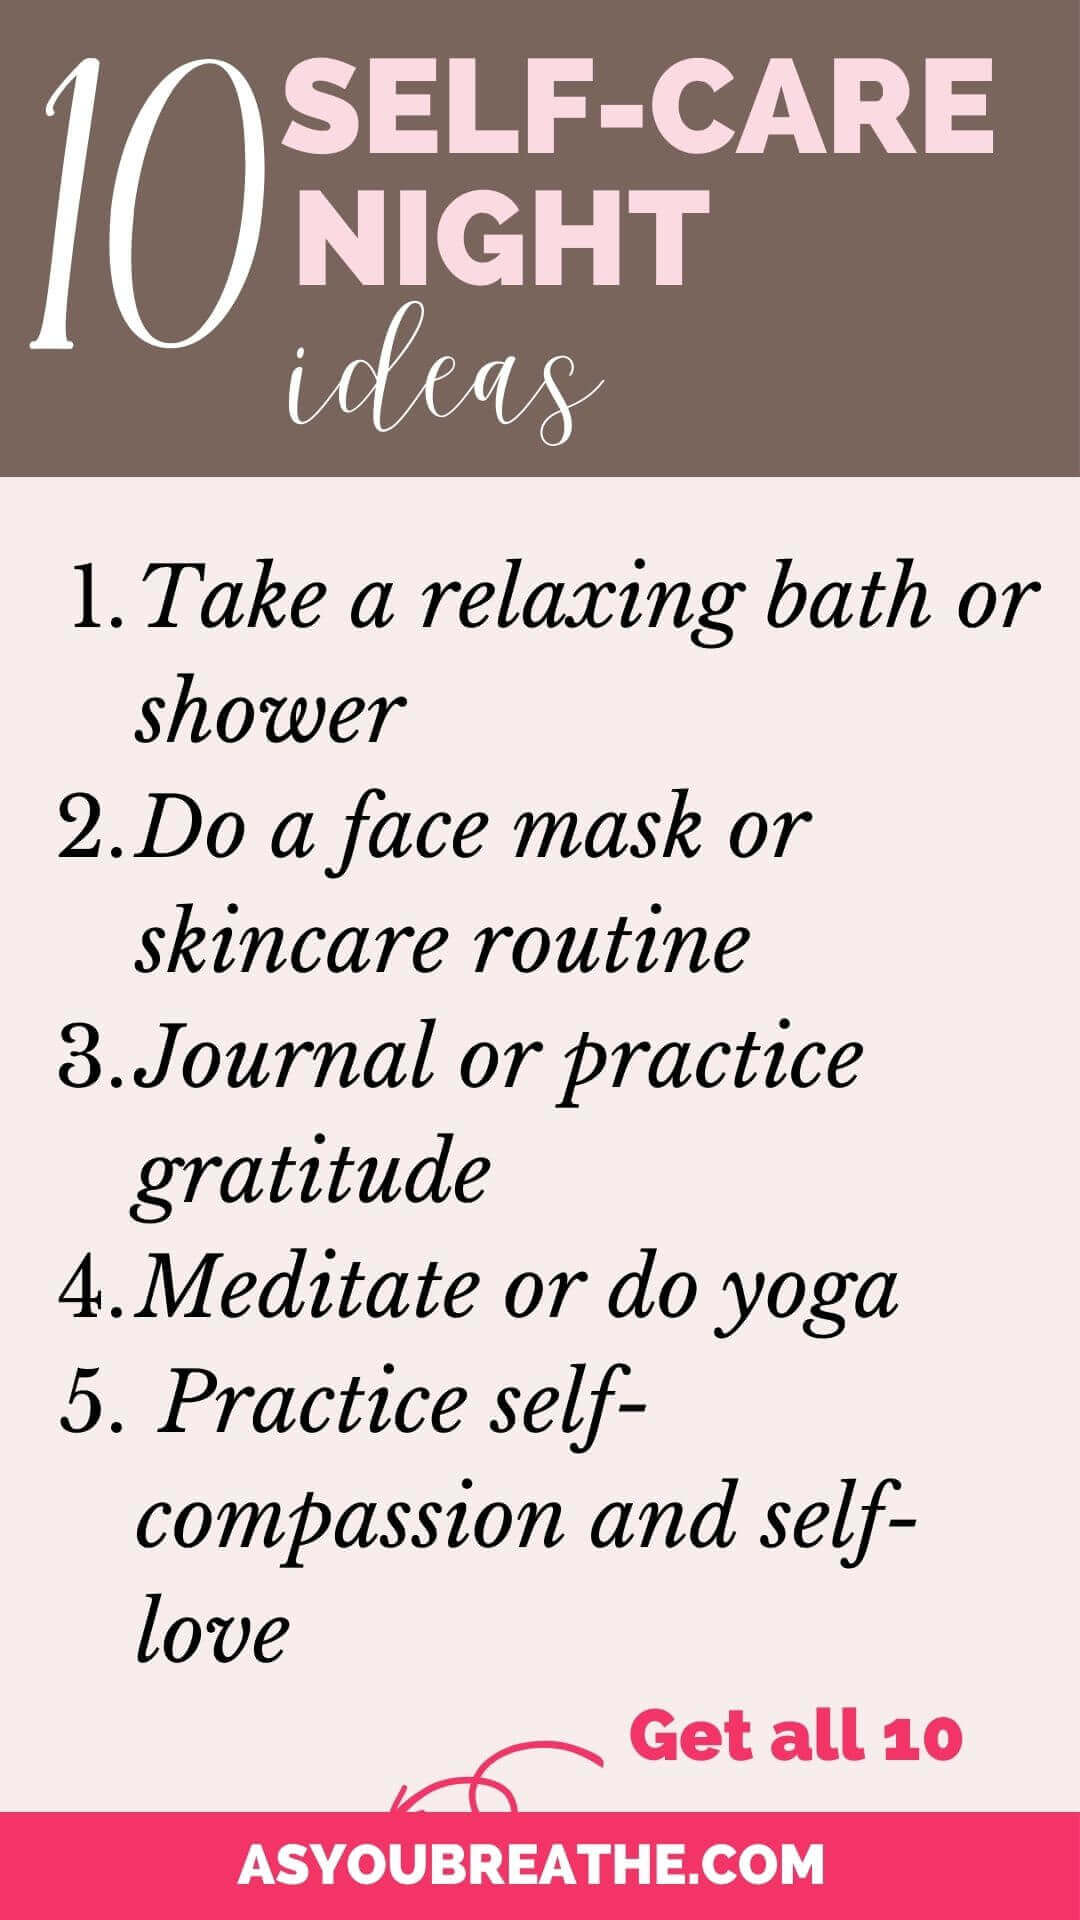 Self Care Night: 10 Things to Do for Deep Relaxation